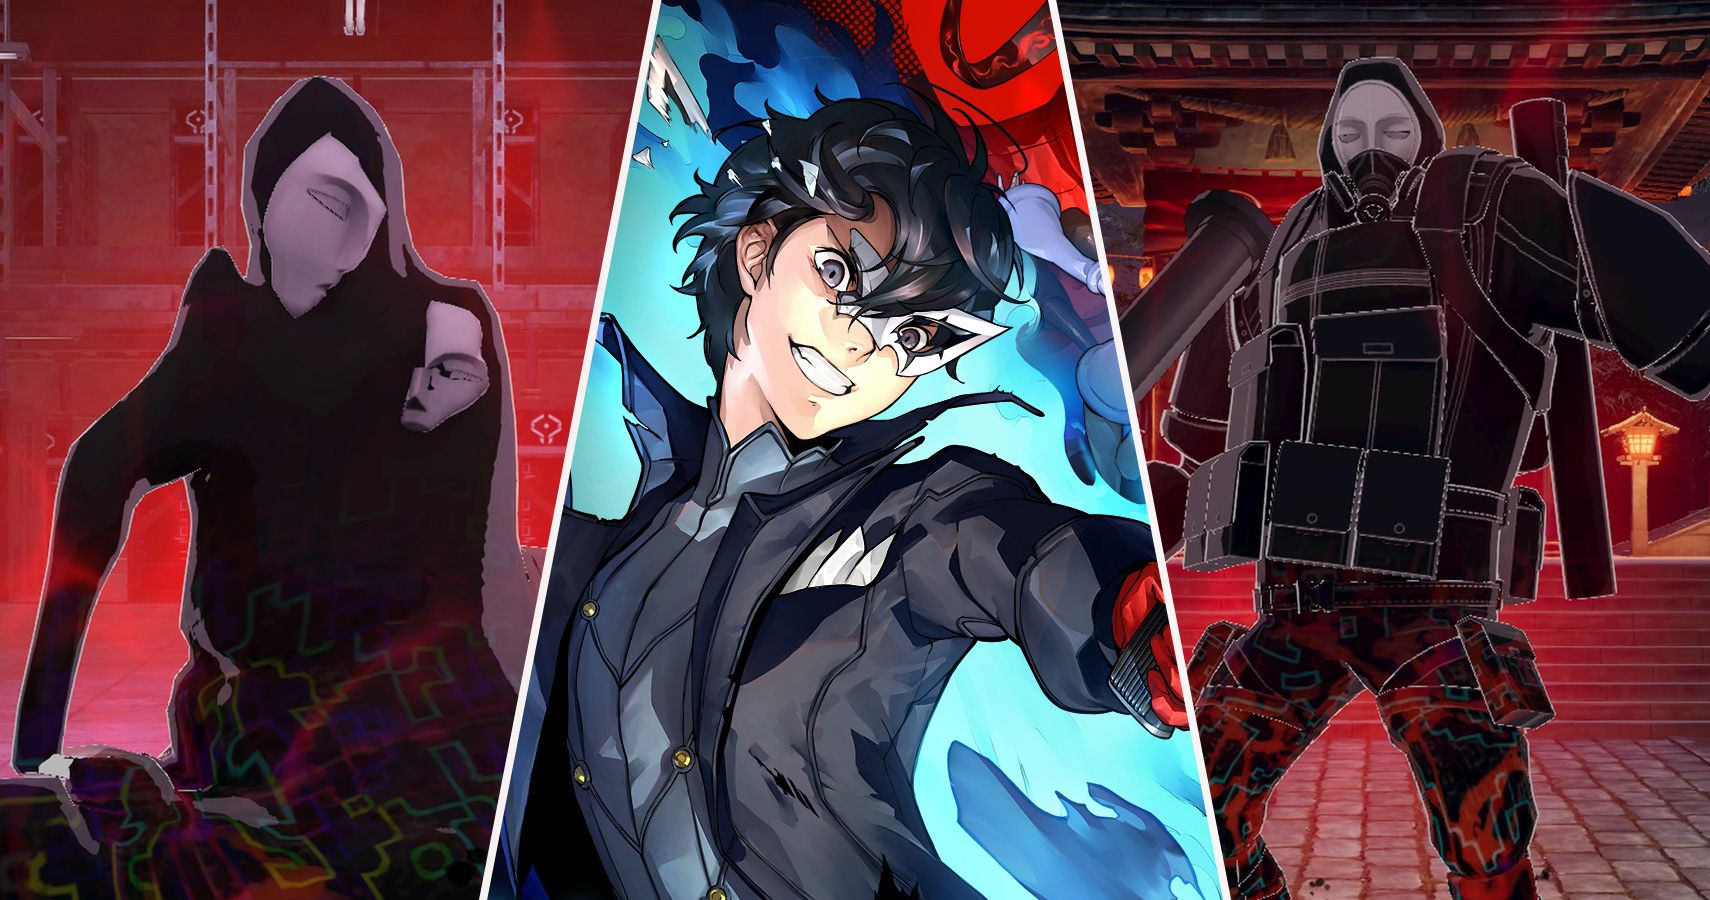 Persona 5 Strikers Powerful Shadow collage